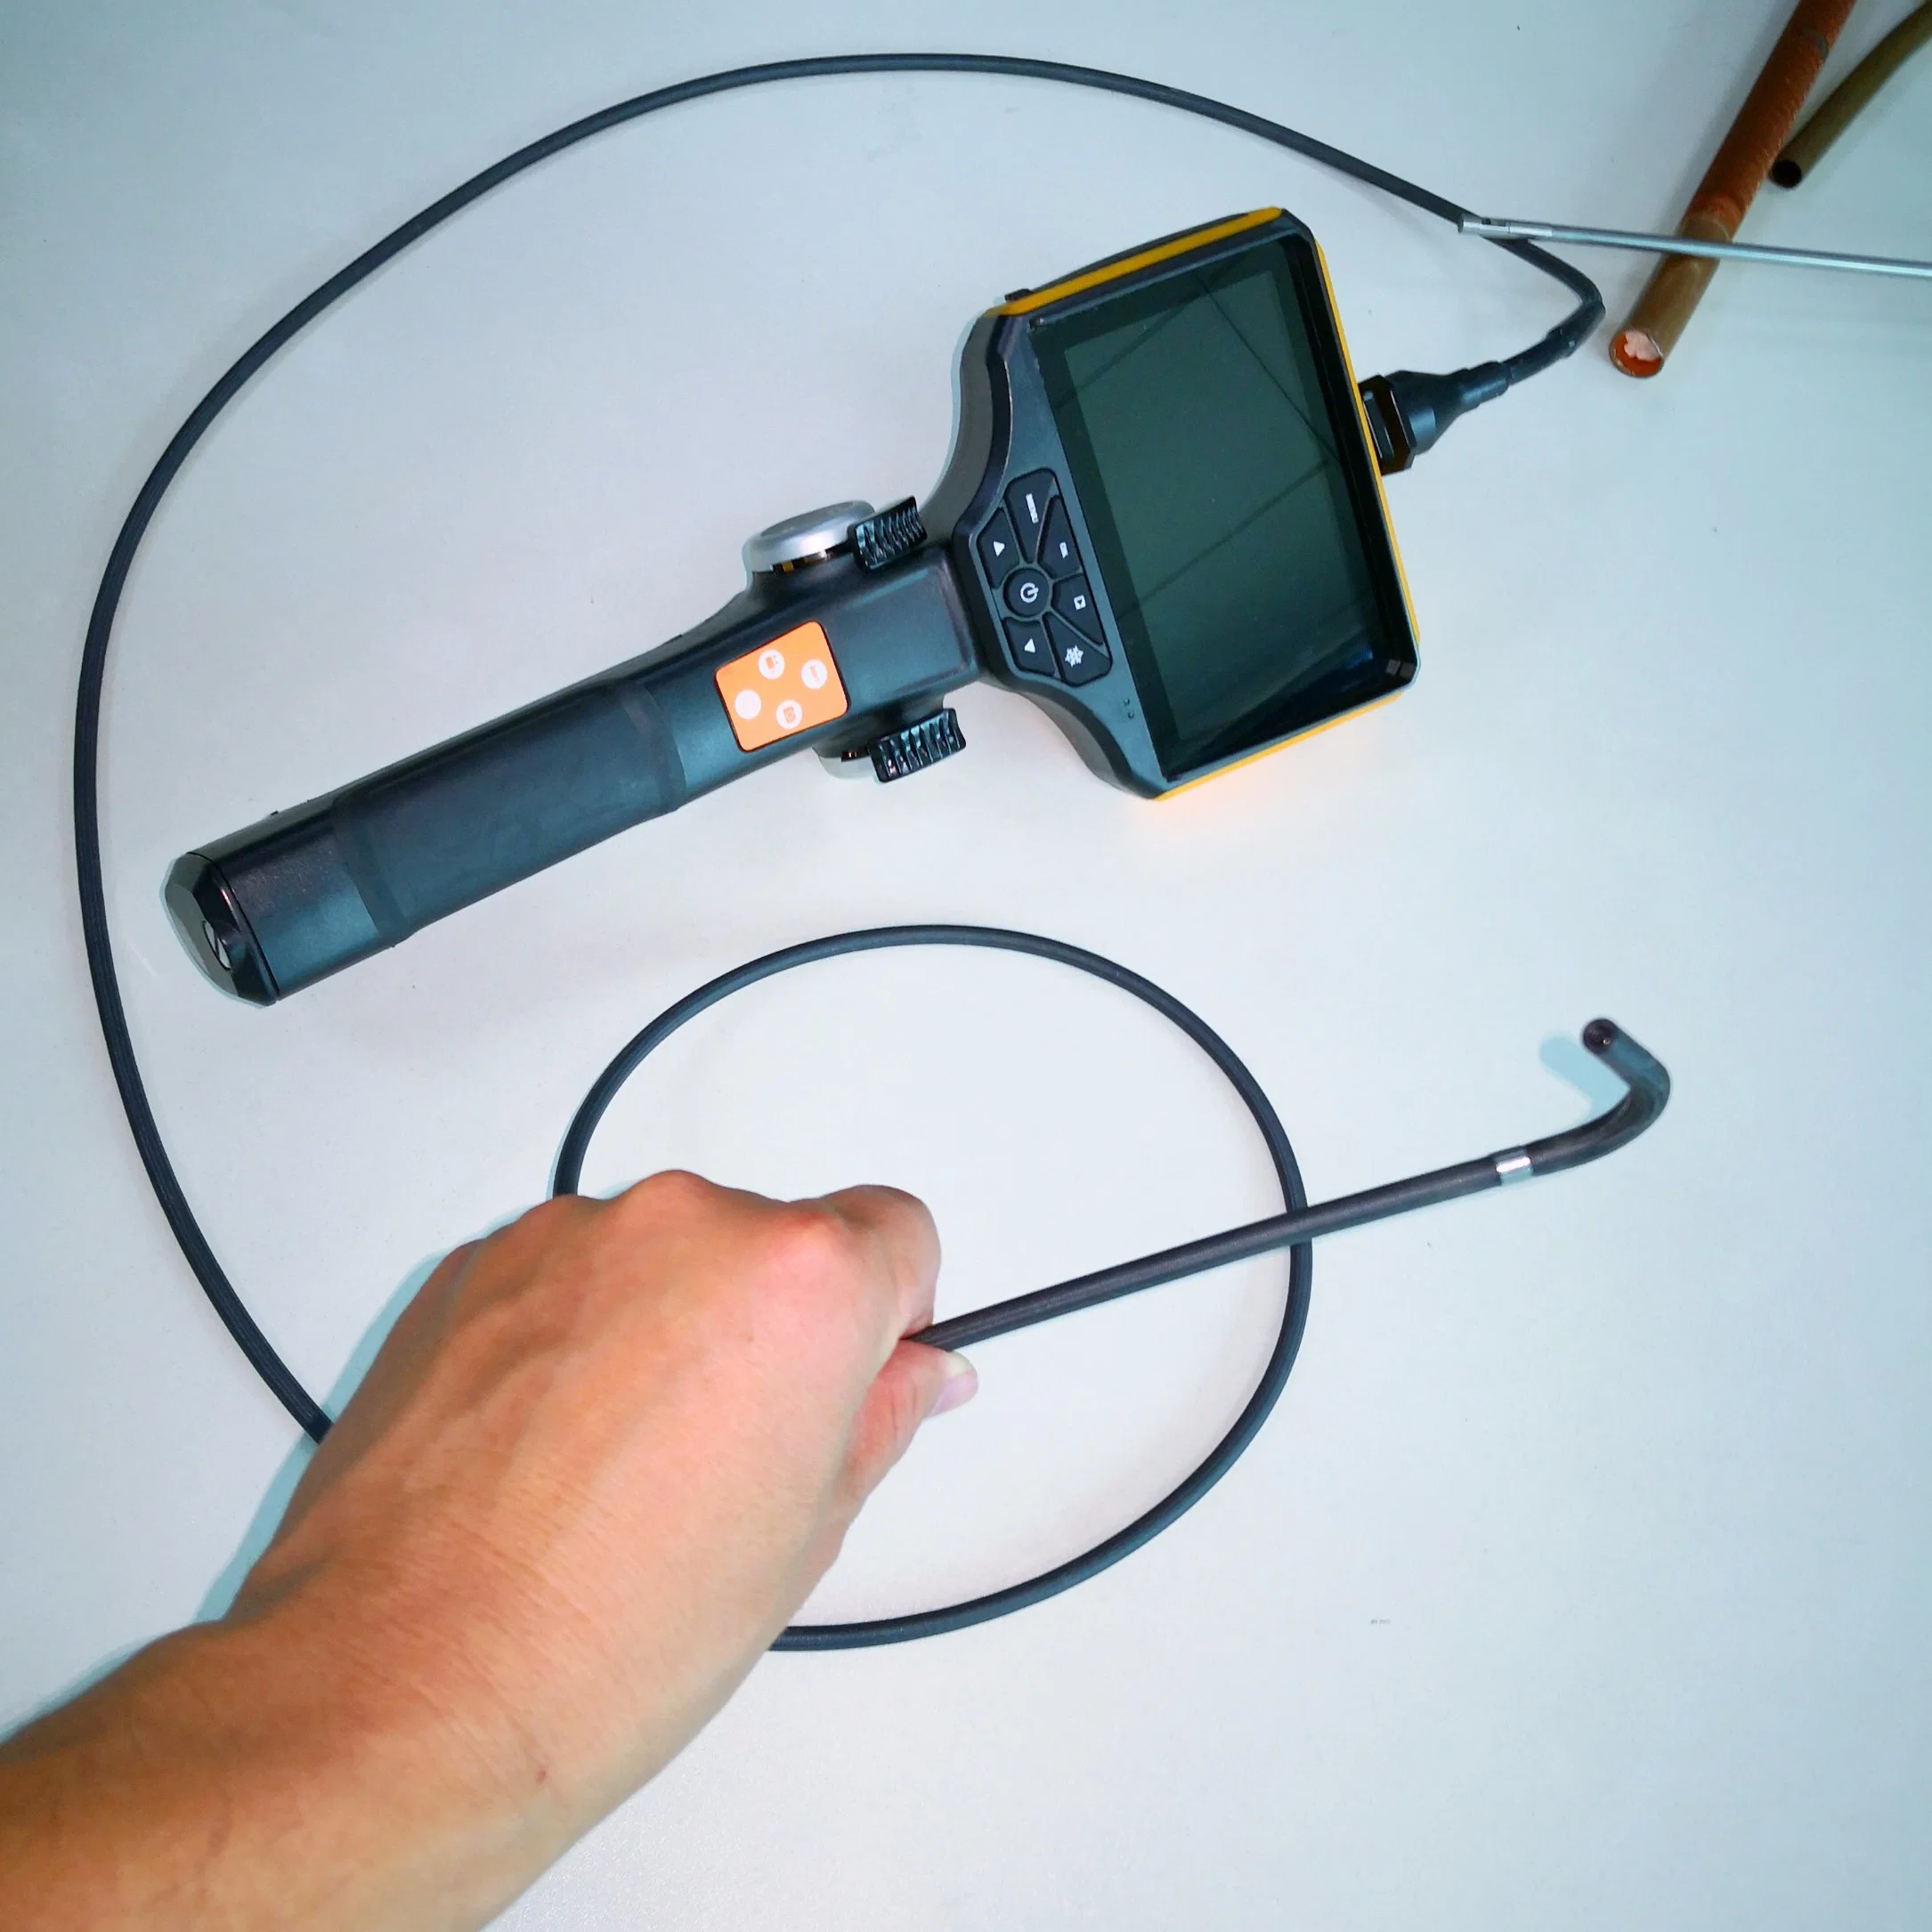 Flexible Joystick Industrial Video Endoscope with 1.5m Testing Cable, 5 Inches Monitor Size, 2.8mm Camera Lens for Visual Inspection